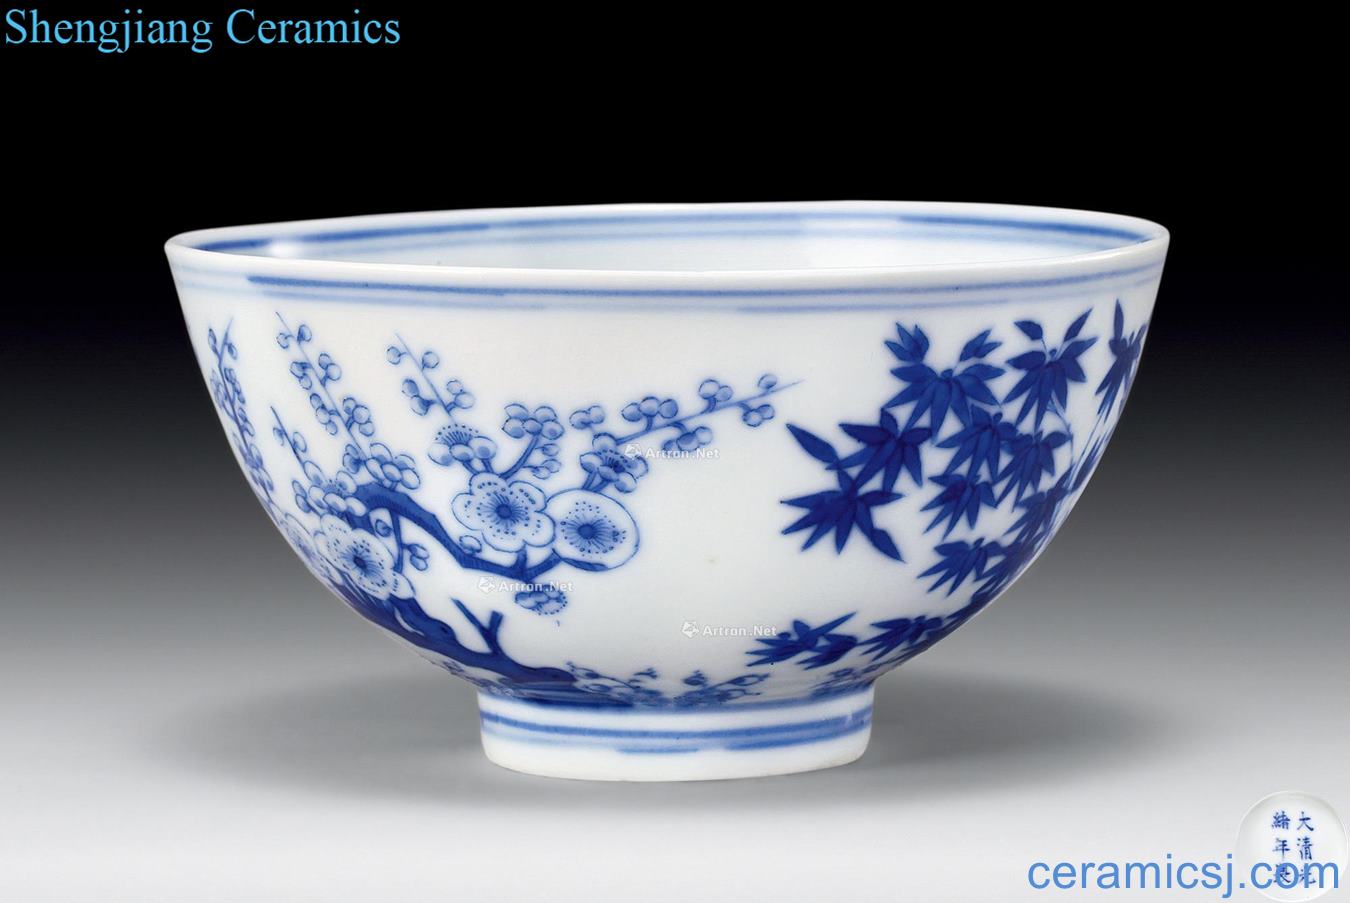 Qing guangxu Blue and white, poetic bowl